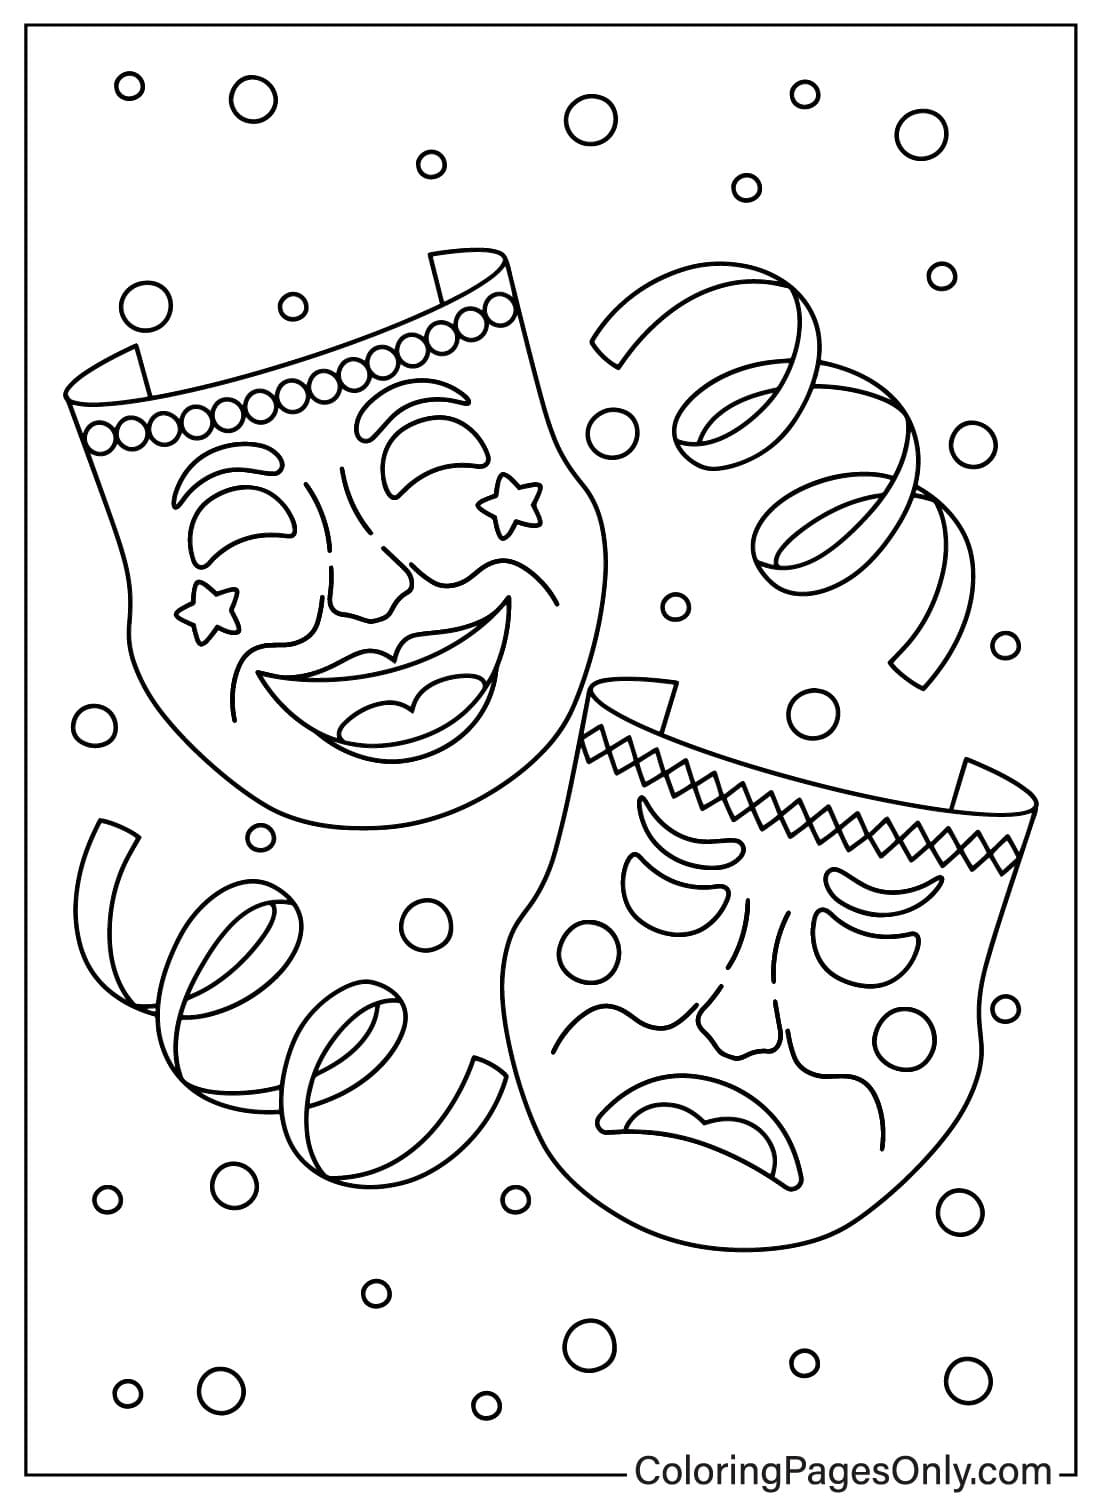 Carnival Coloring Page to Print